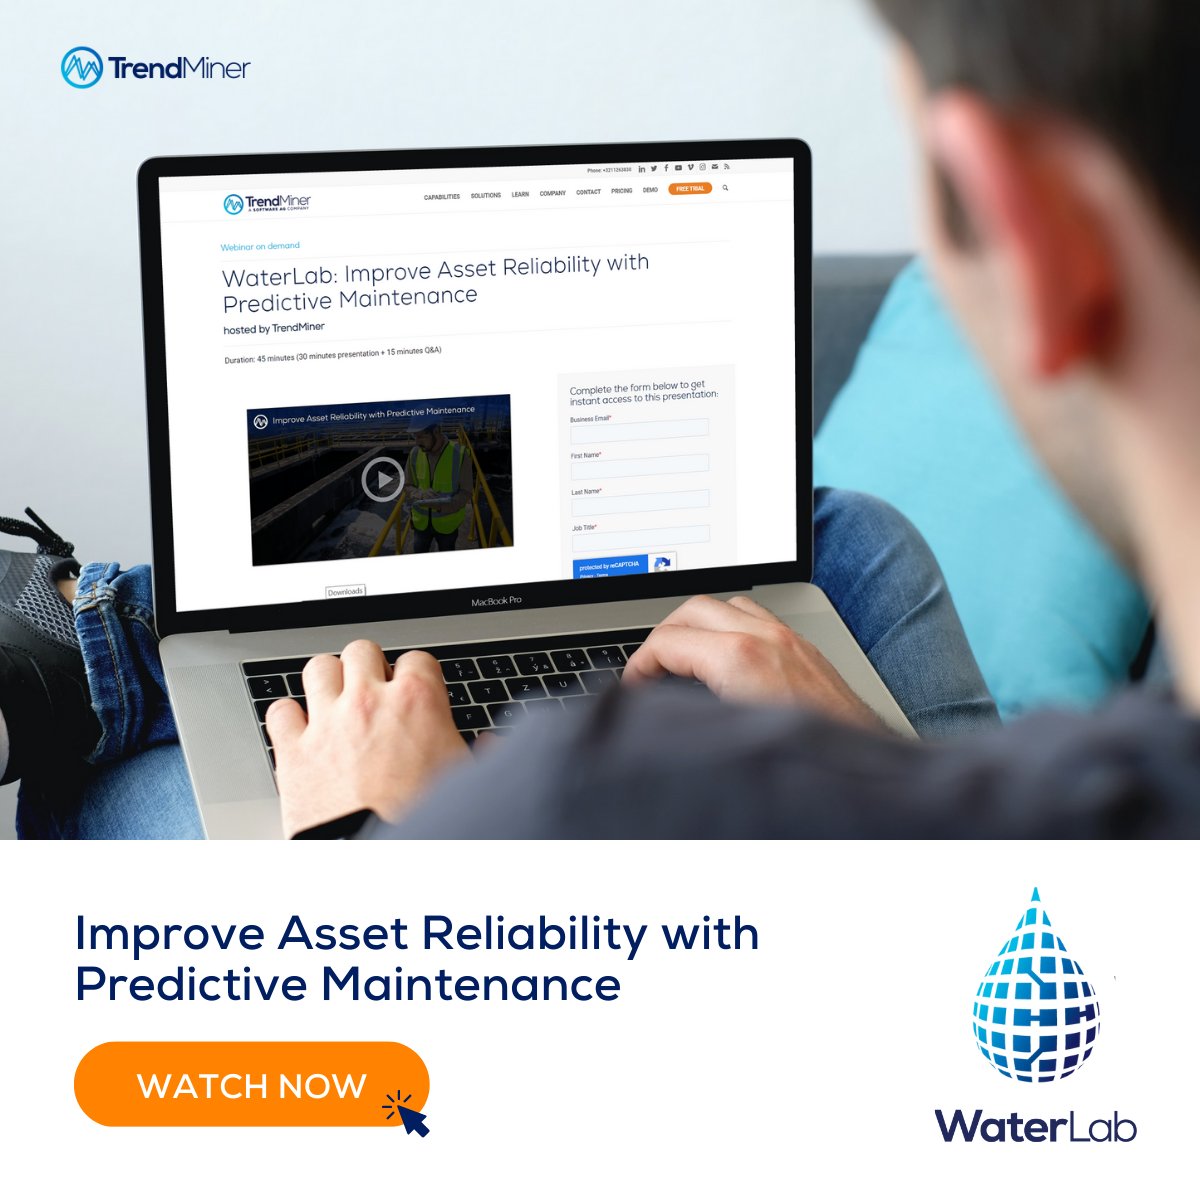 In this webinar, we show, using practical use cases, how to improve asset reliability with predictive maintenance and find additional ways to contribute to sustainability goals.

👉 Watch now: bit.ly/3JQ2Wwe

#sustainability #advancedanalytics #industry40